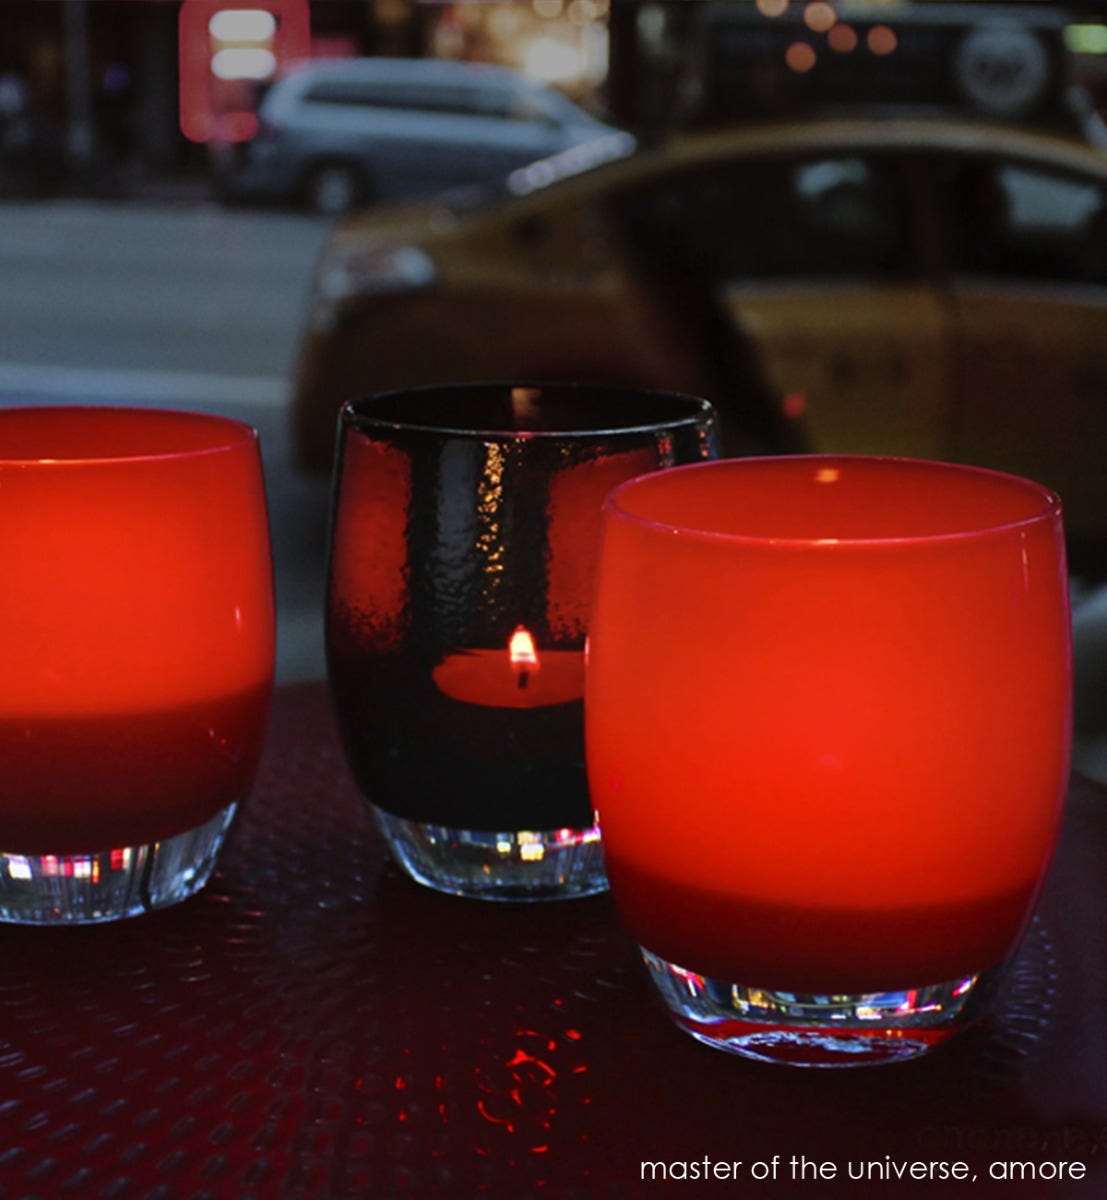 amore opaque red hand-blown glass votive candle holder. Paired with master of the universe.